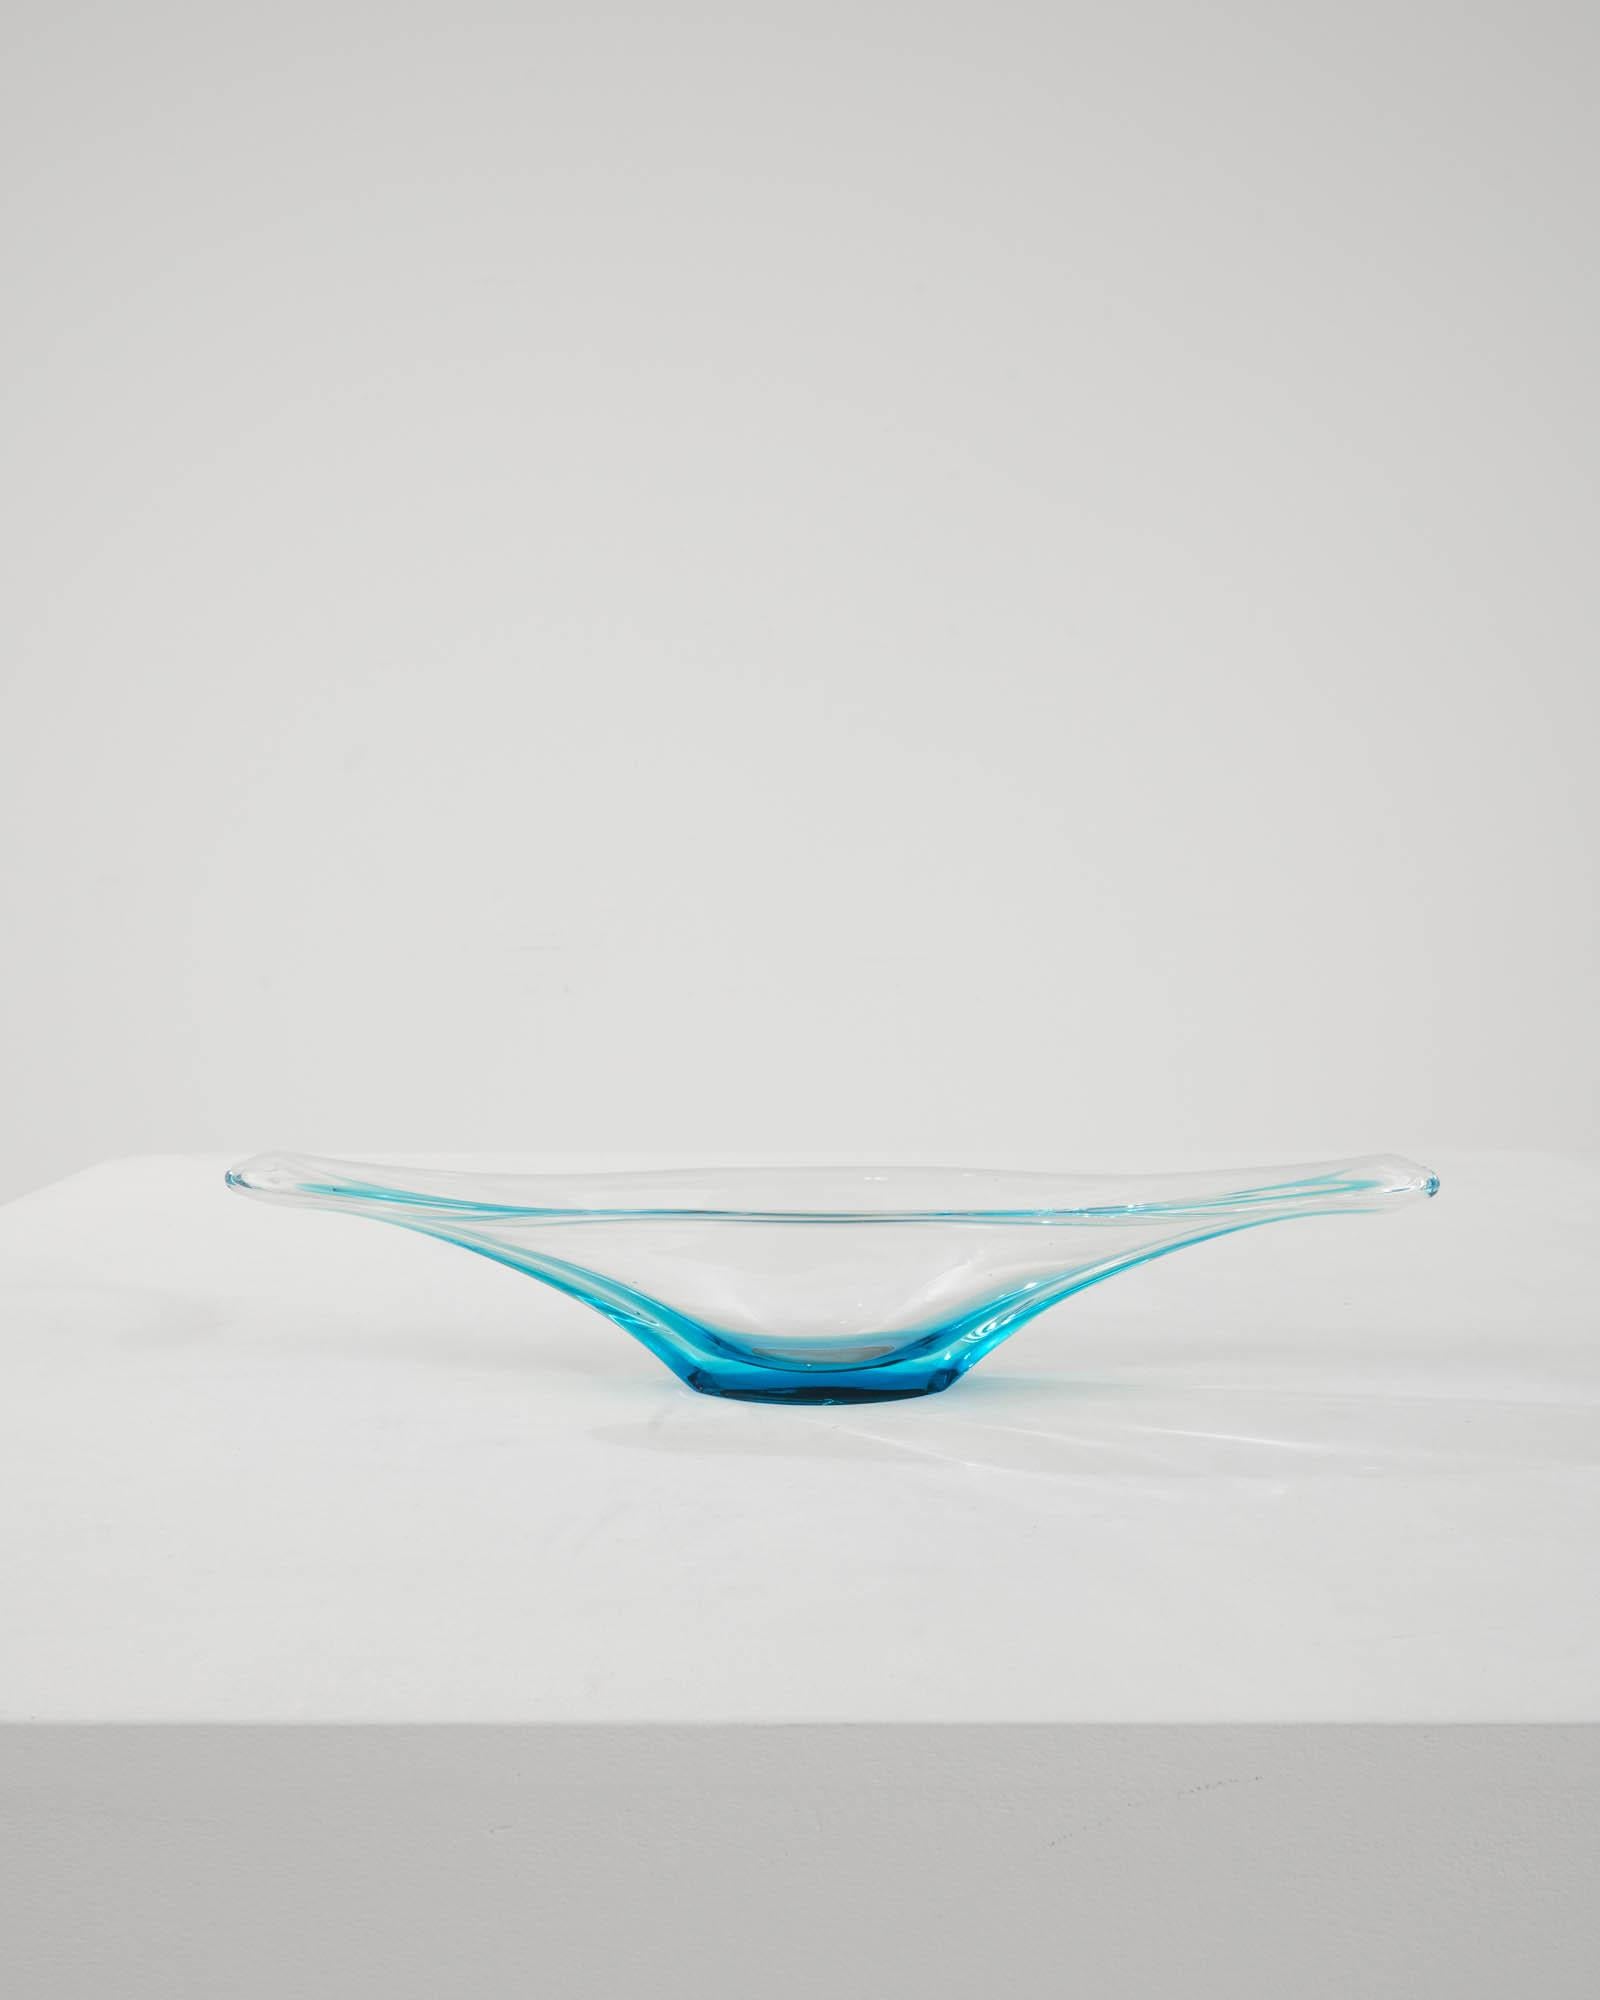 The vivid hues and liquid lines of blown art glass create an unmissable accent. Made in Italy circa 1960, expressive glasswork forms a bold silhouette. Organic and abstract, reminiscent of a water droplet captured in slow motion. A luminous gradient